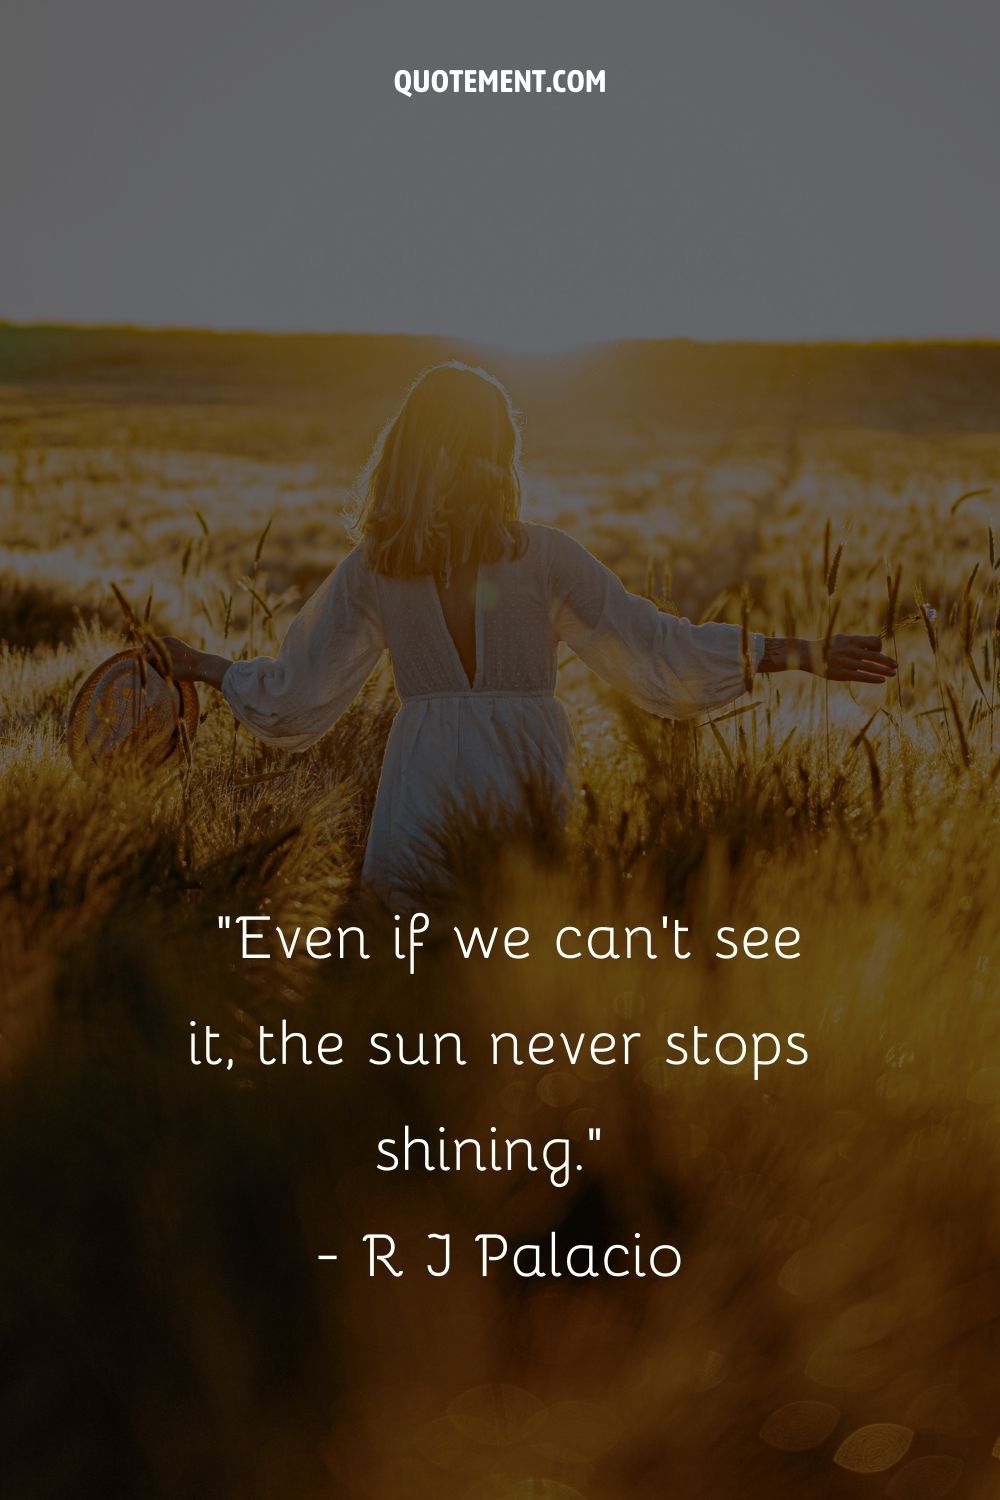 Even if we can’t see it, the sun never stops shining